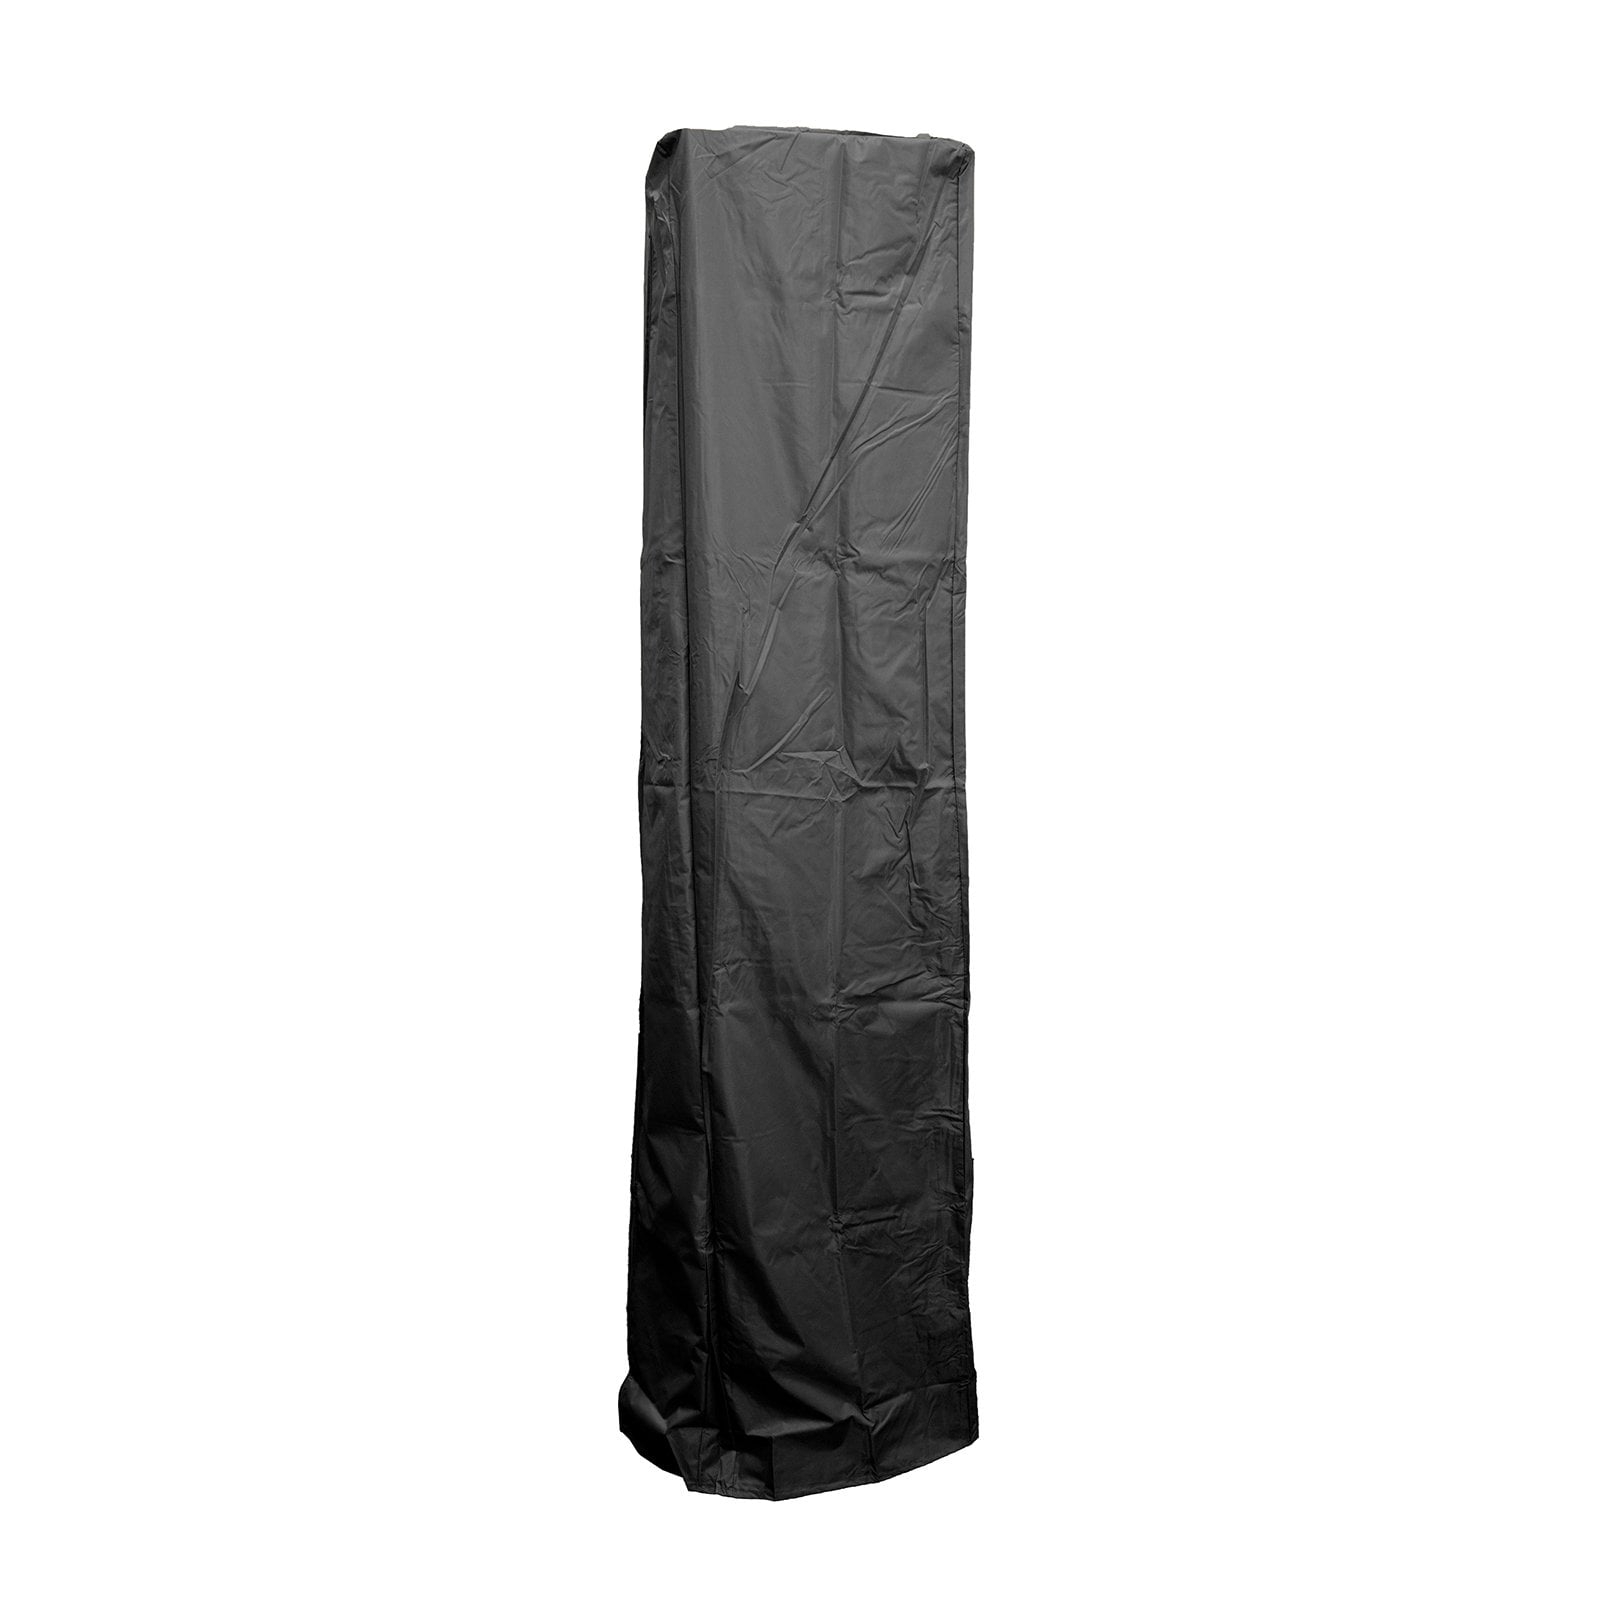 Picture of AZ Patio Heaters HVD-SGTCV-B Heavy Duty Waterproof Square Glass Tube Heater Cover, Black